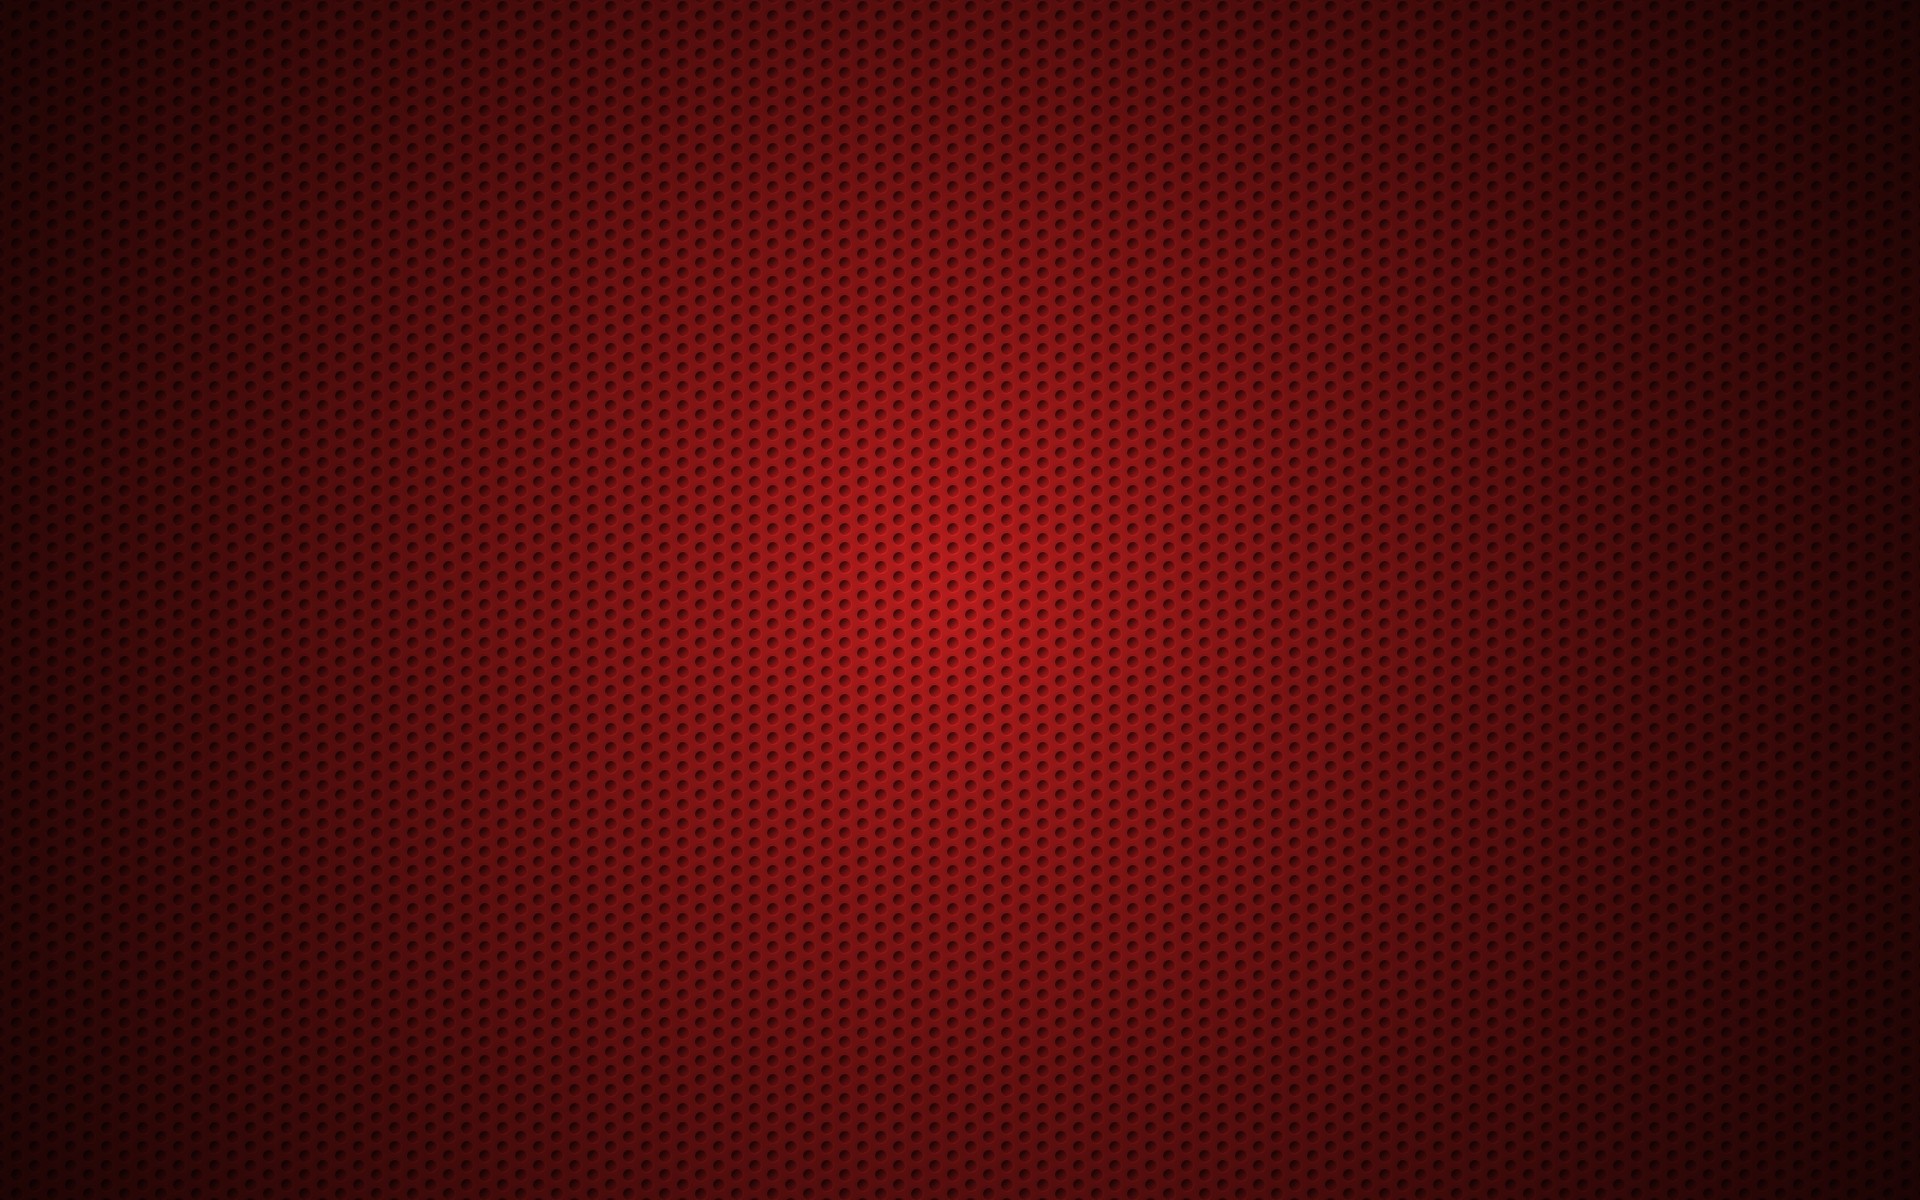 Textured Wallpaper Image Textures Red Images 1920X1200 | Chainimage